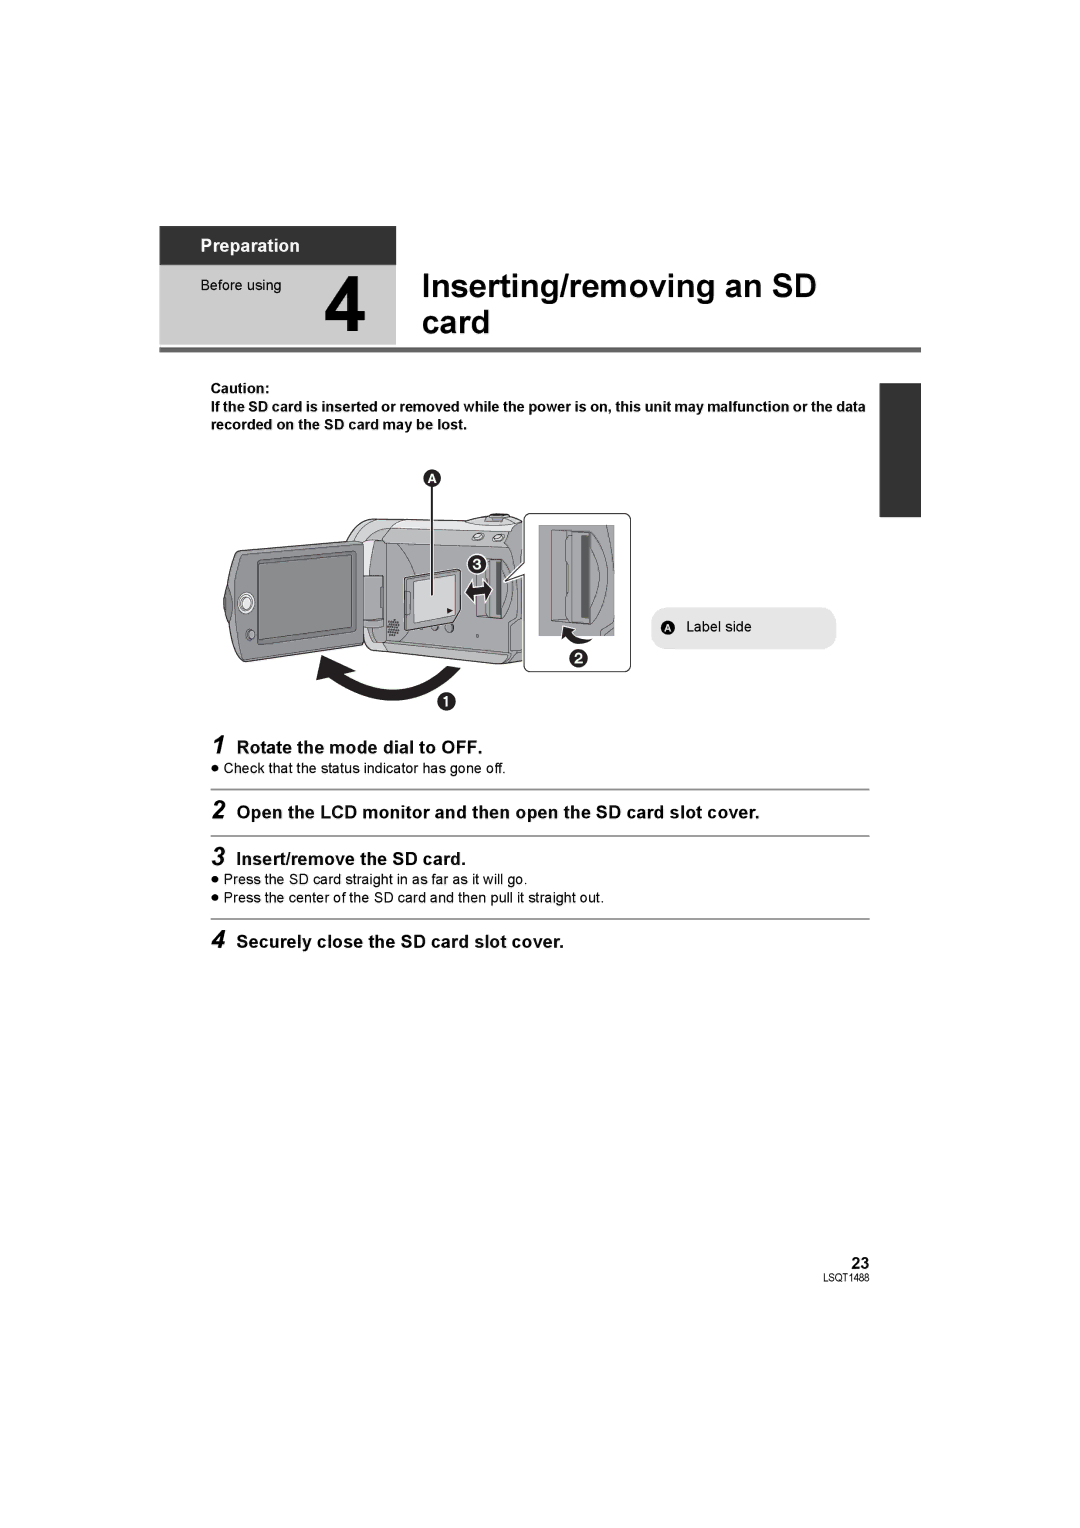 Panasonic SDR-S26PC Card, Inserting/removing an SD, Rotate the mode dial to OFF, Securely close the SD card slot cover 